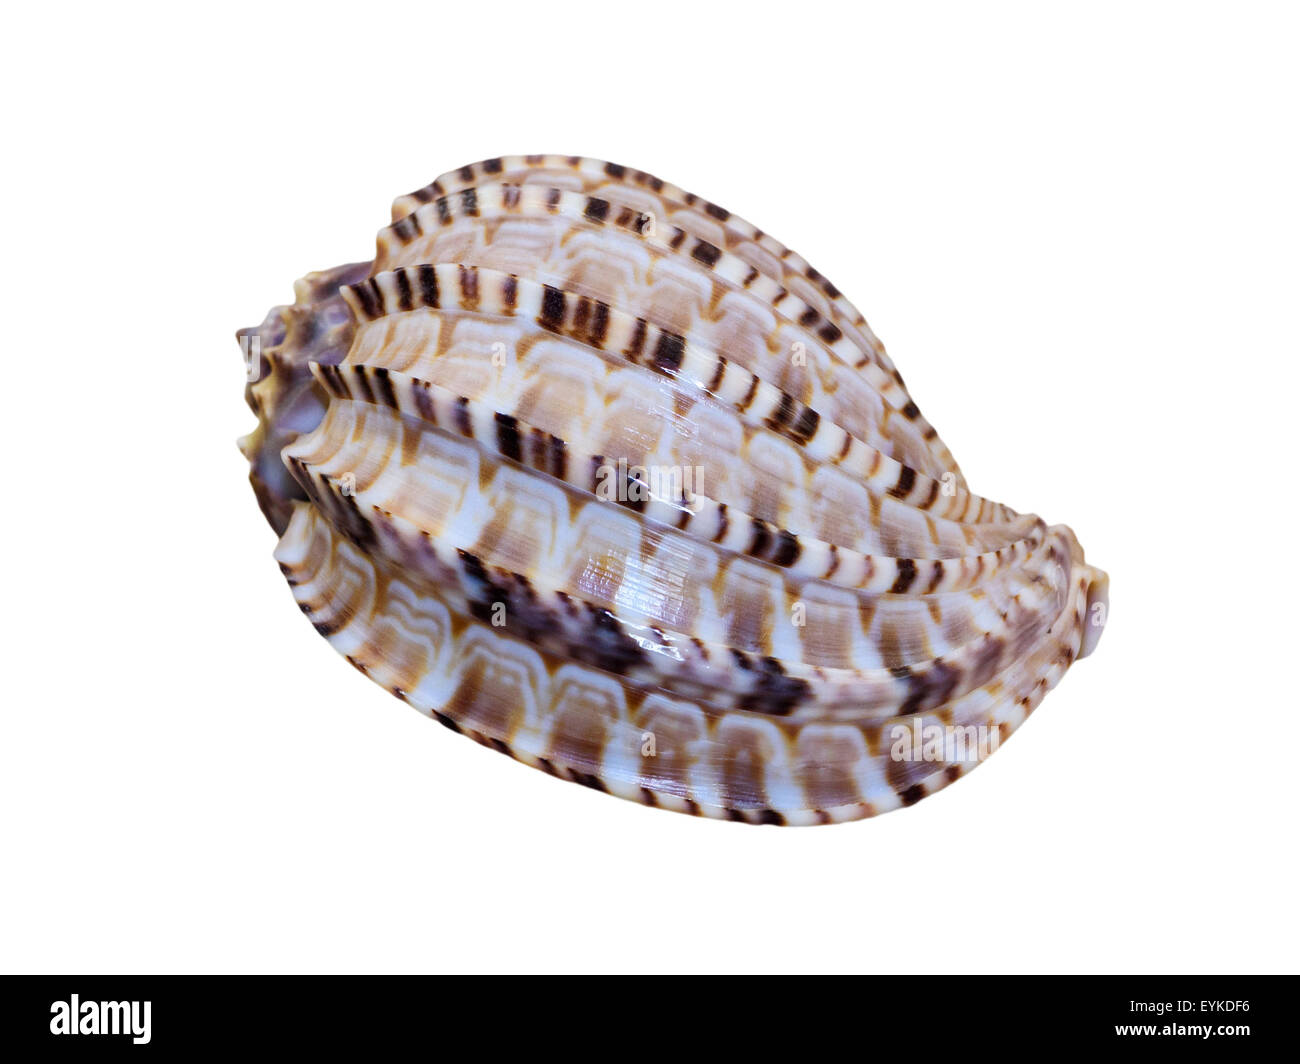 Shell of Articulate Harp or Harpa Articularis is a species sea snail, marine gastropod mollusk isolated on white background with Stock Photo